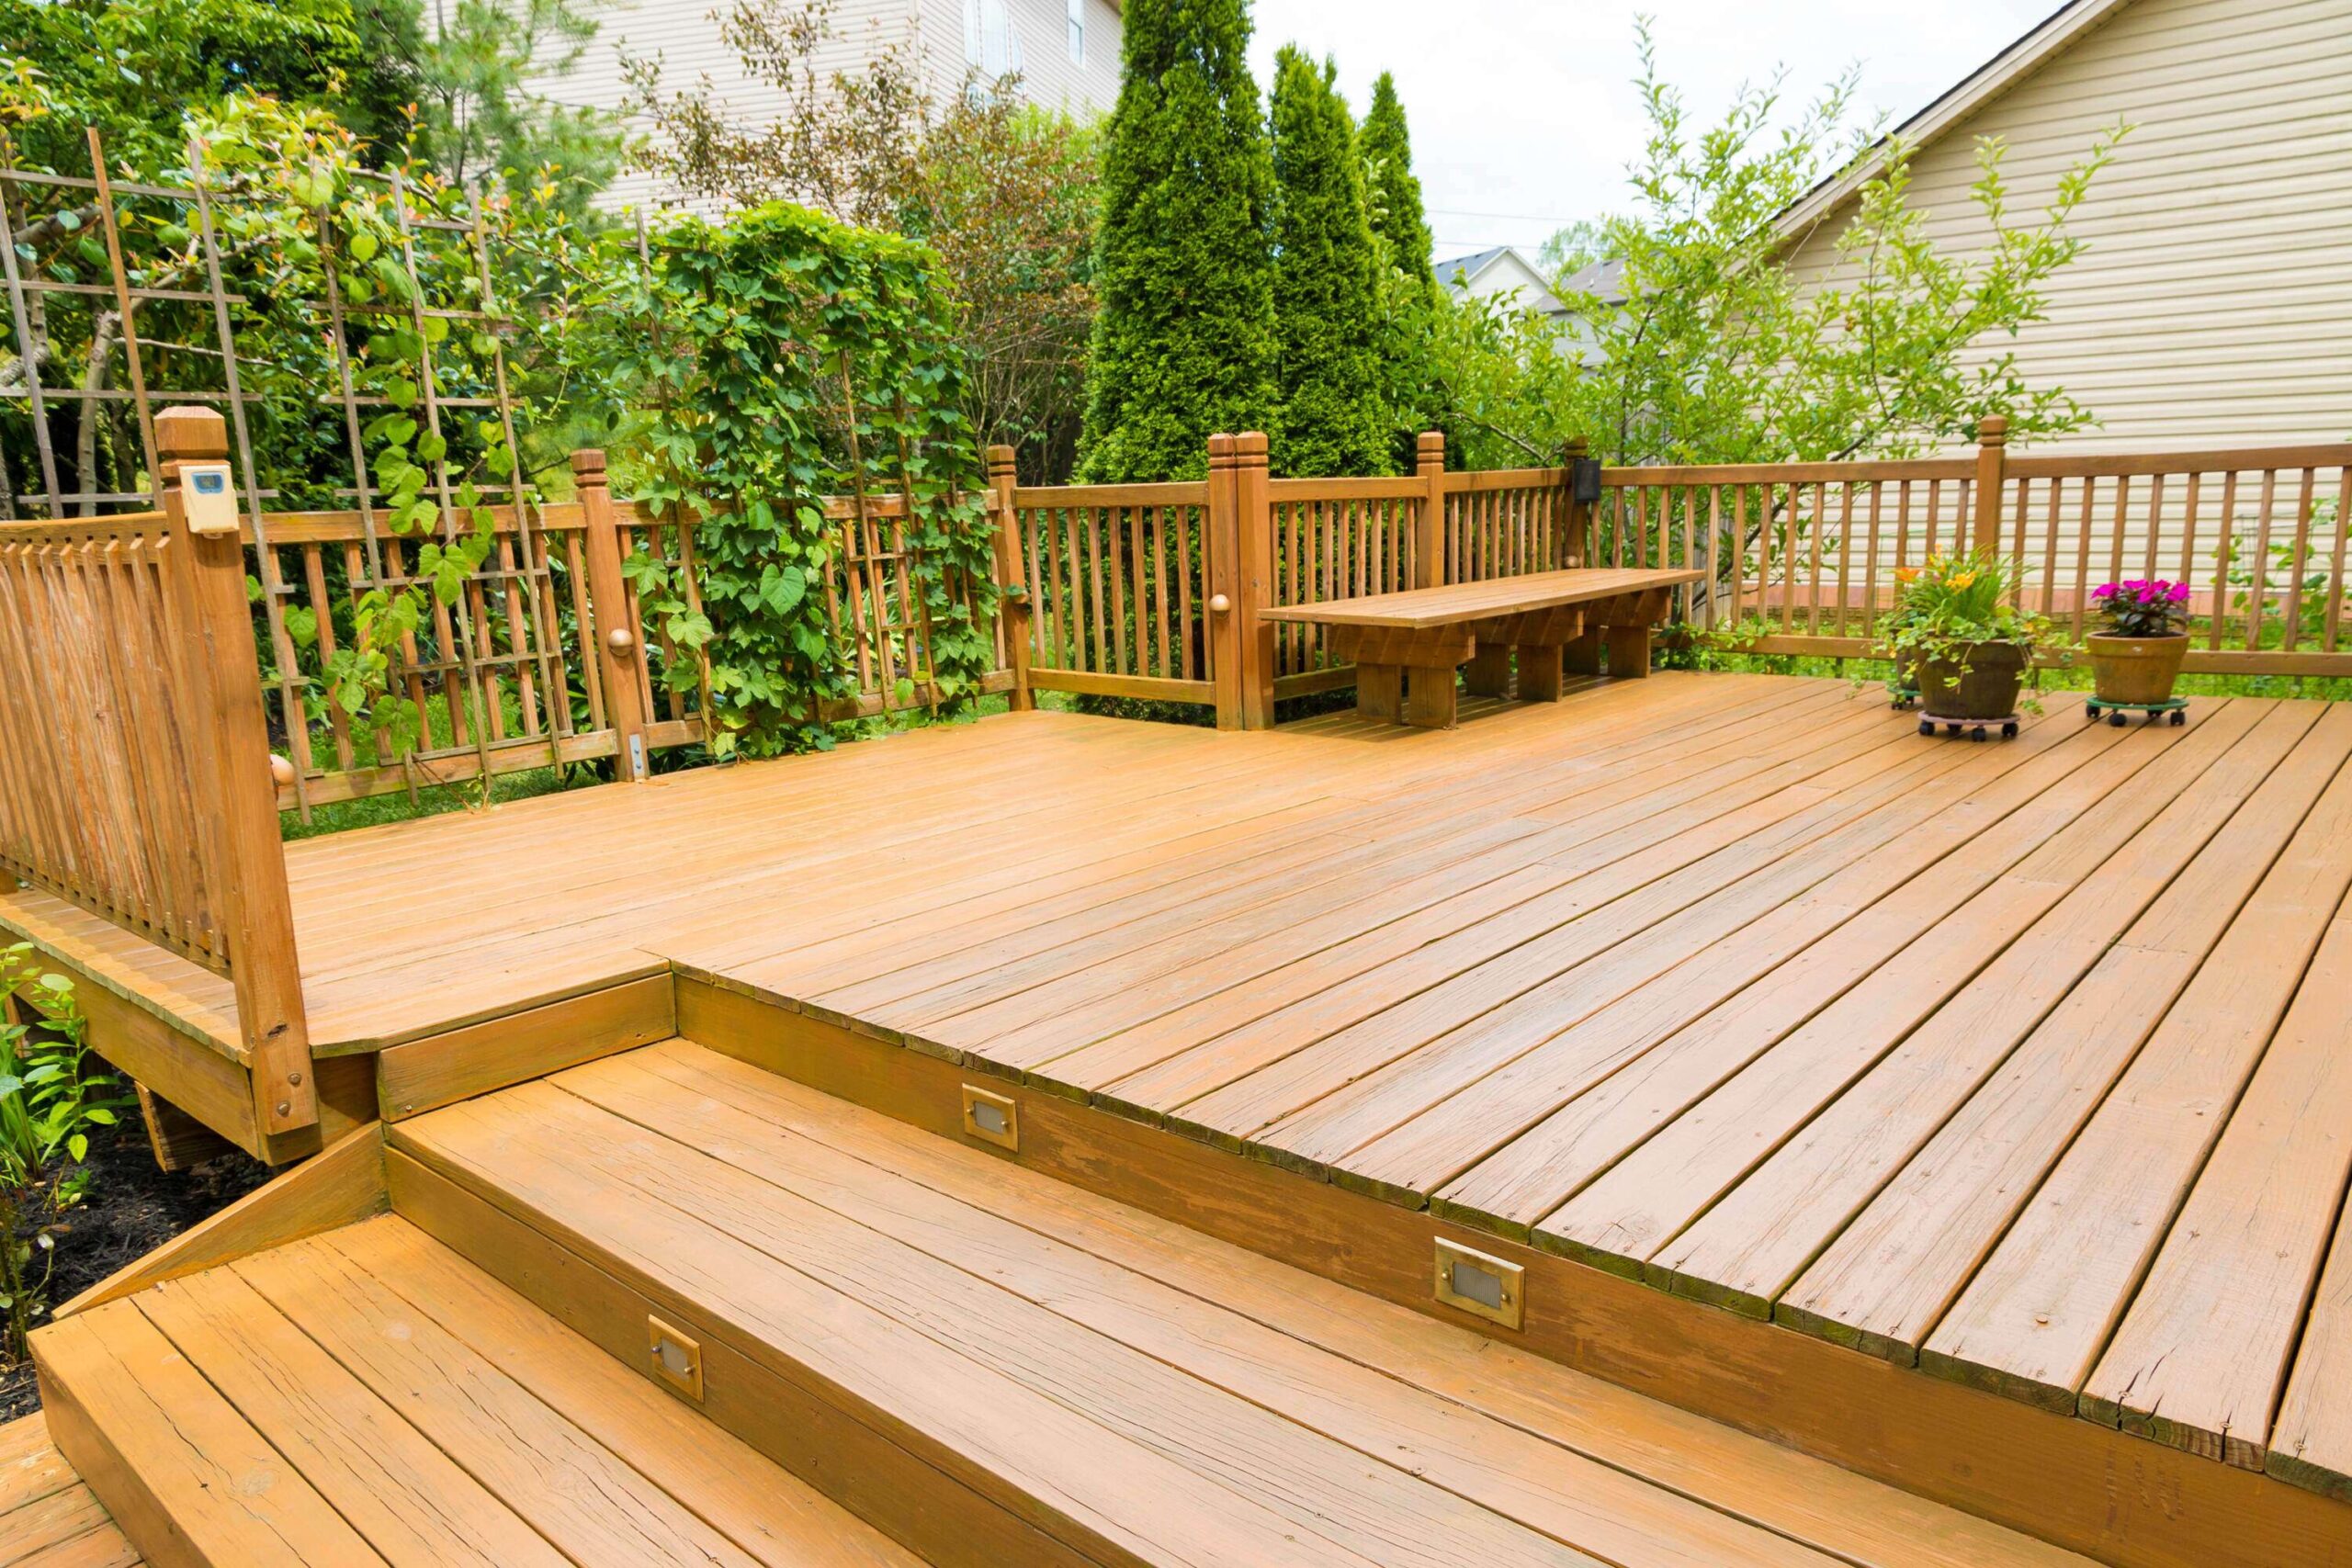 The Benefits of Hiring Professional Deck Builders for Your Outdoor Space